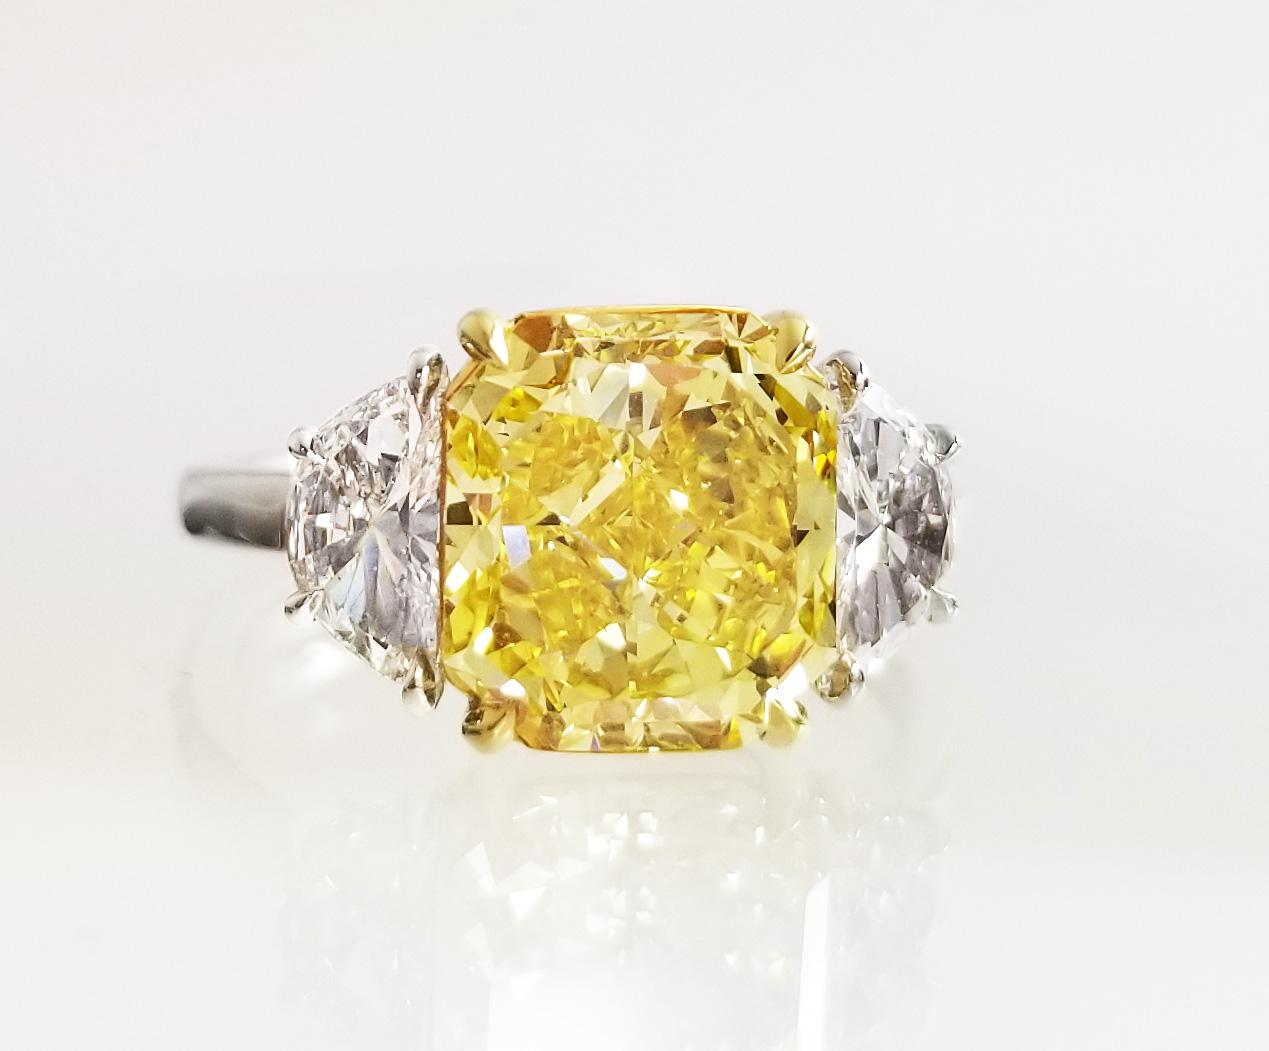 Radiant Cut Scarselli 3 Plus Fancy Vivid Yellow Natural Diamond Engagement Platinum Ring GIA For Sale